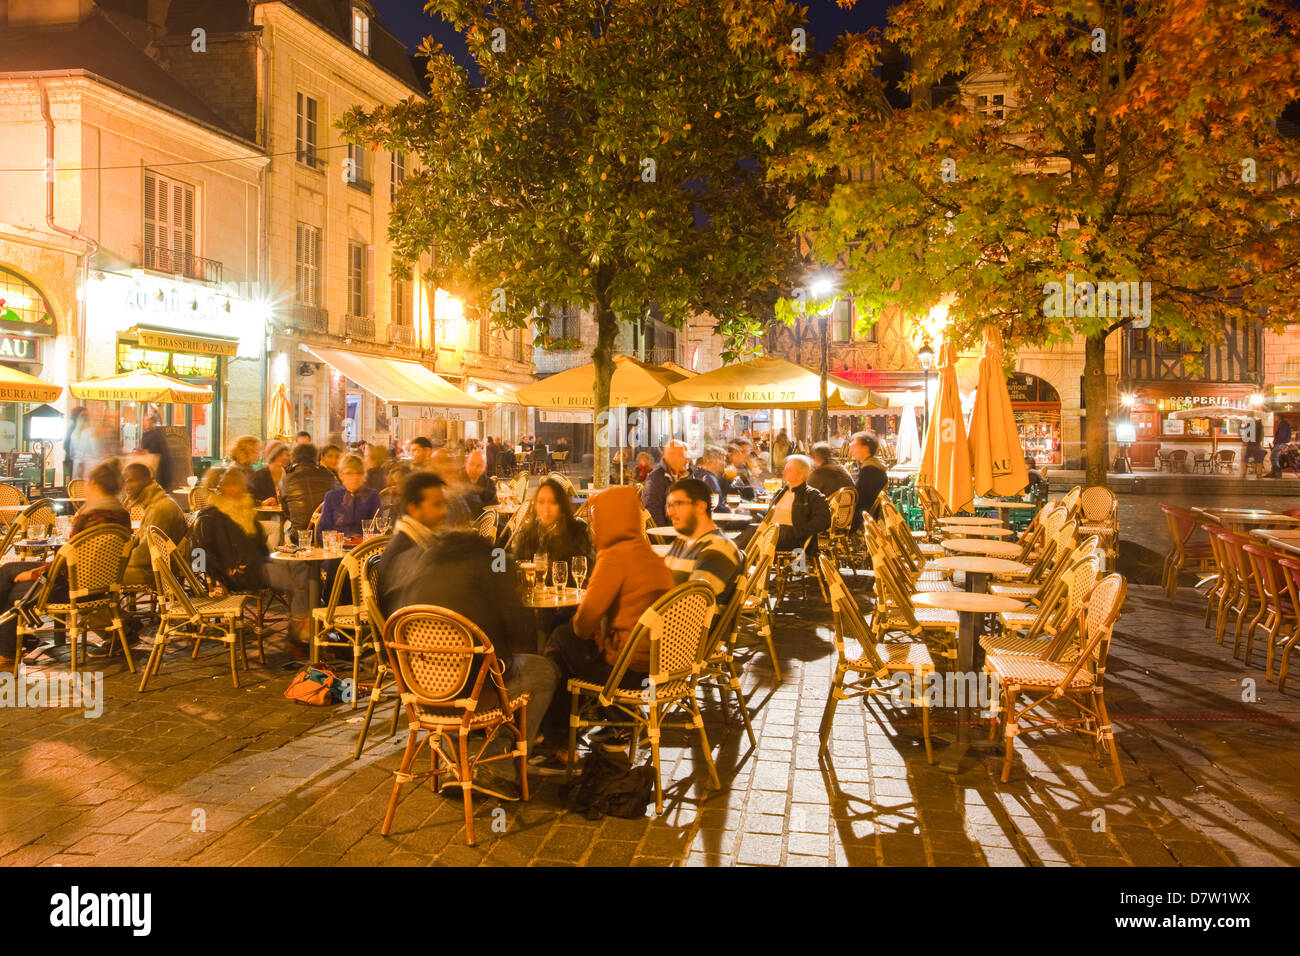 People enjoying the various restaurants and bars in Place Plumereau in Vieux Tours, Indre-et-Loire, Centre, France Stock Photo